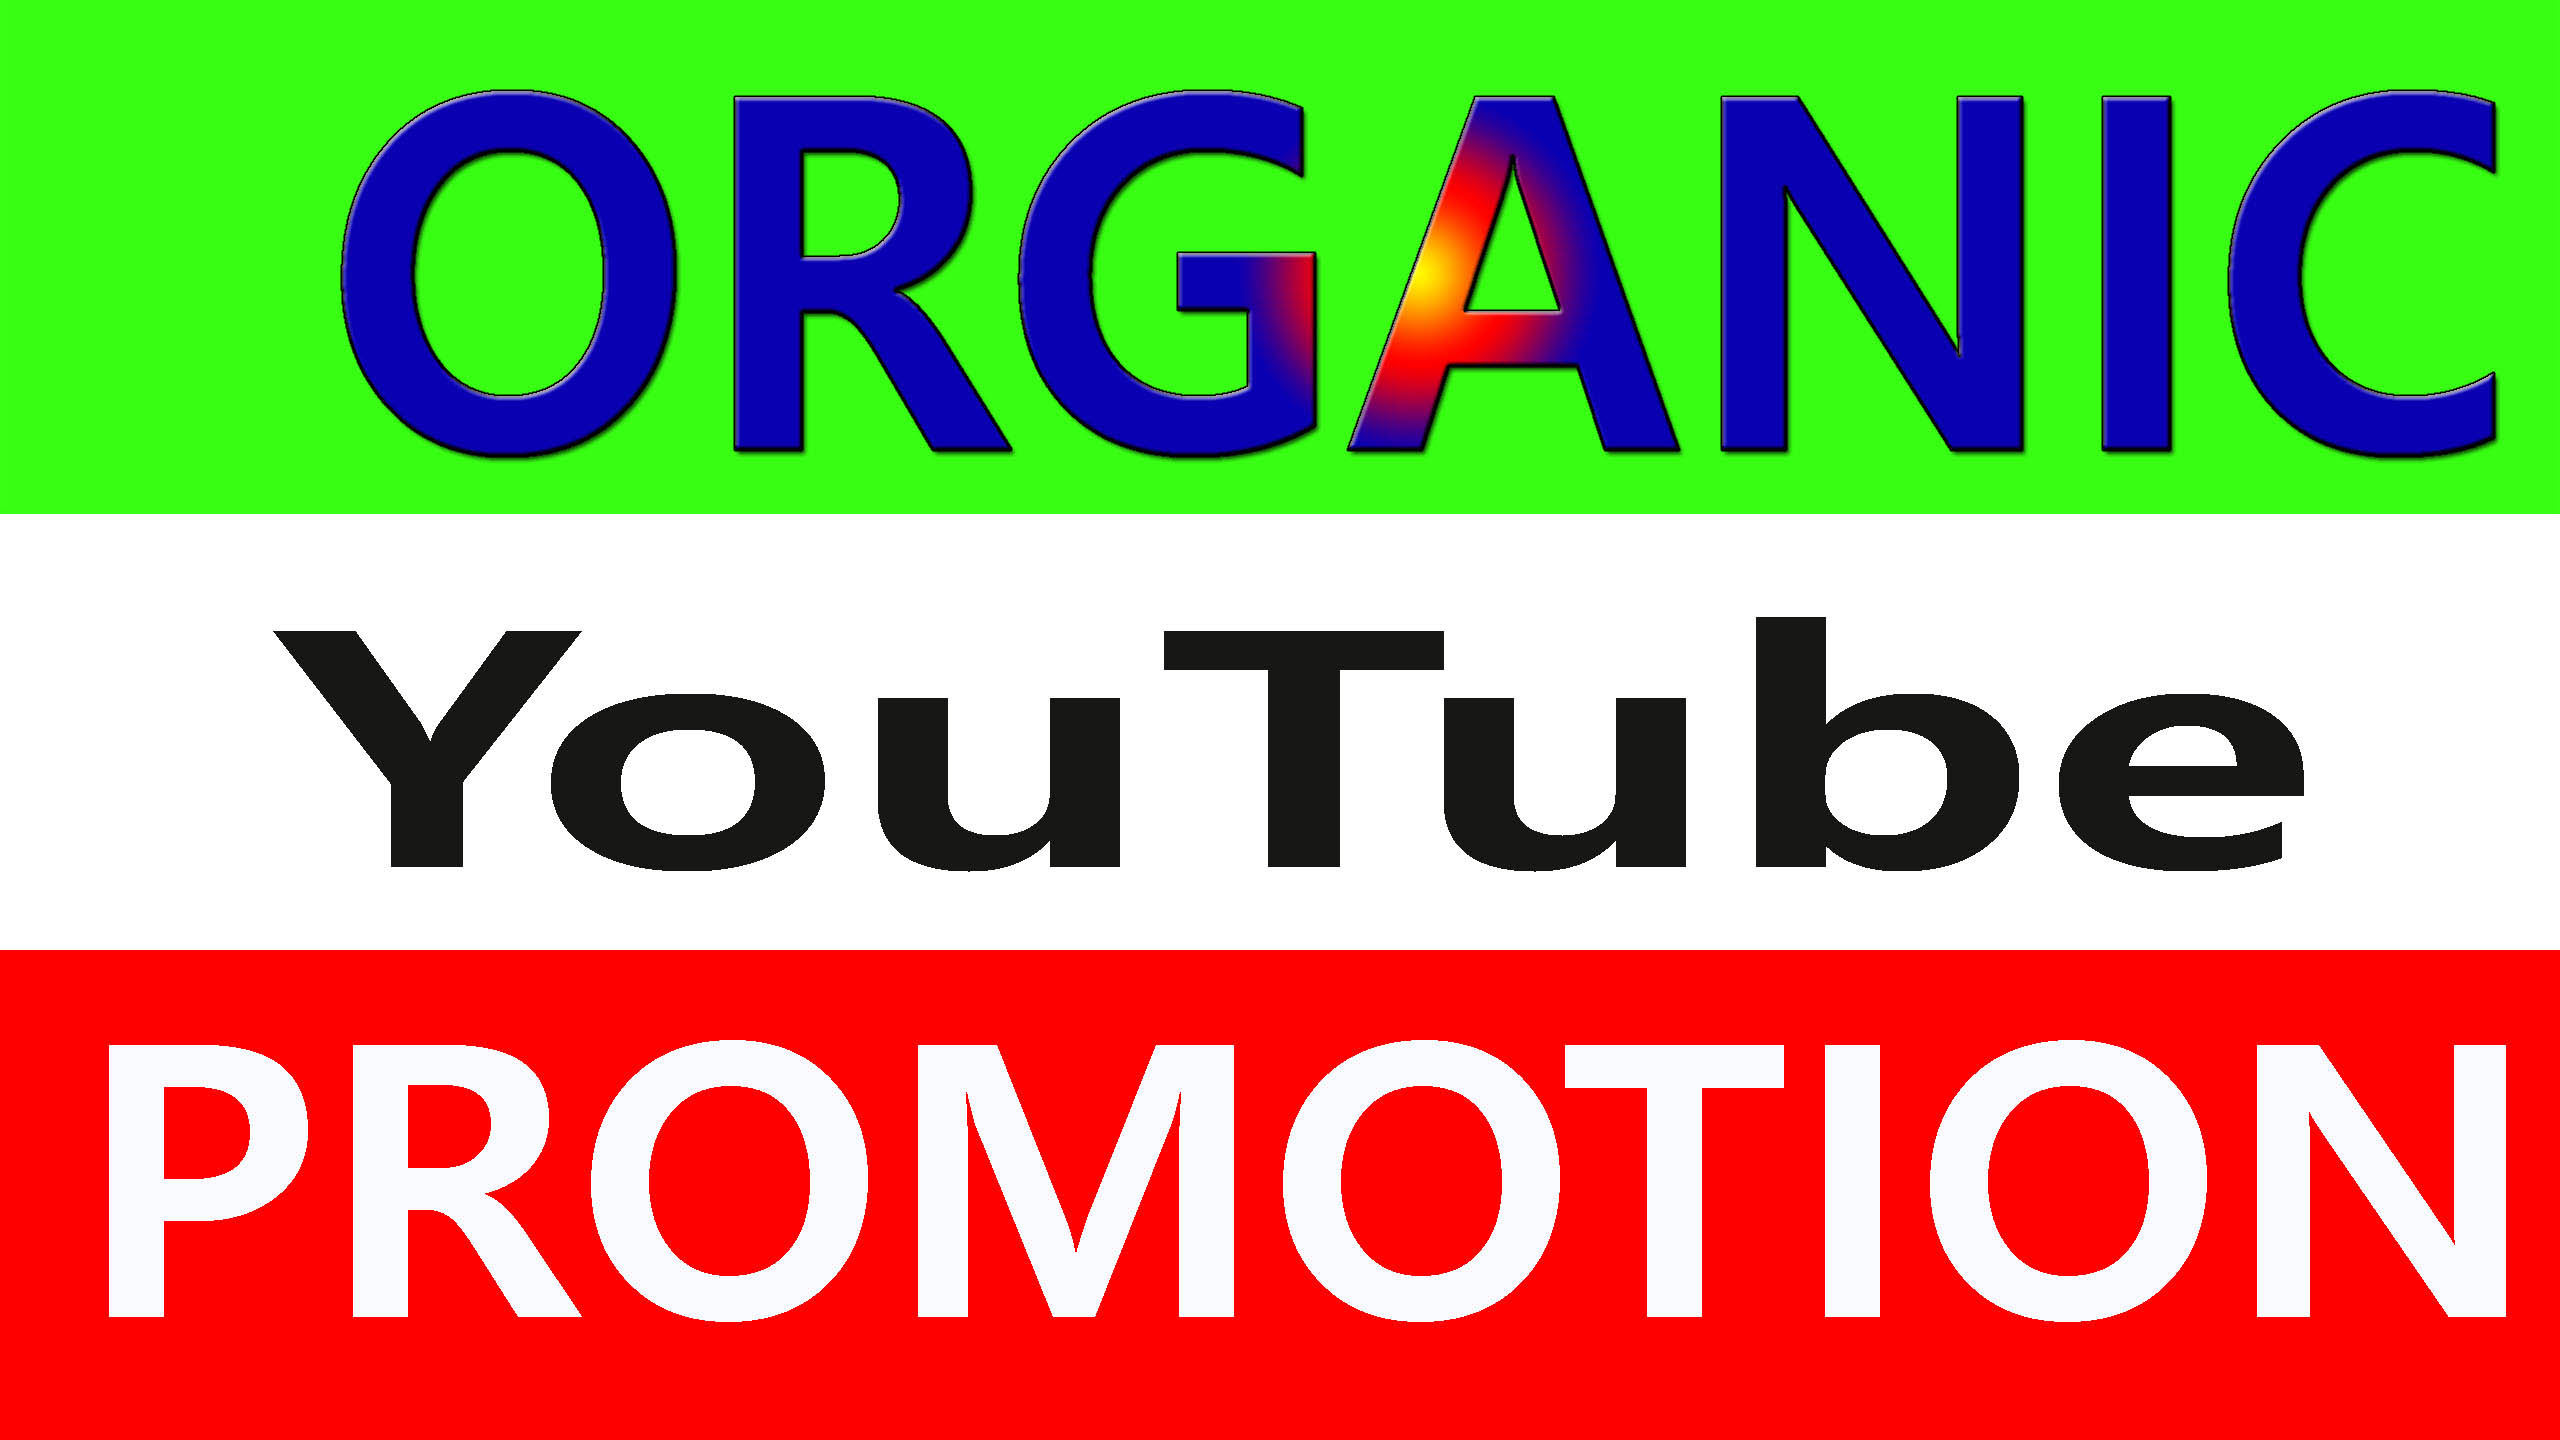 Super Fast High Quality YouTube Video Promote from real user